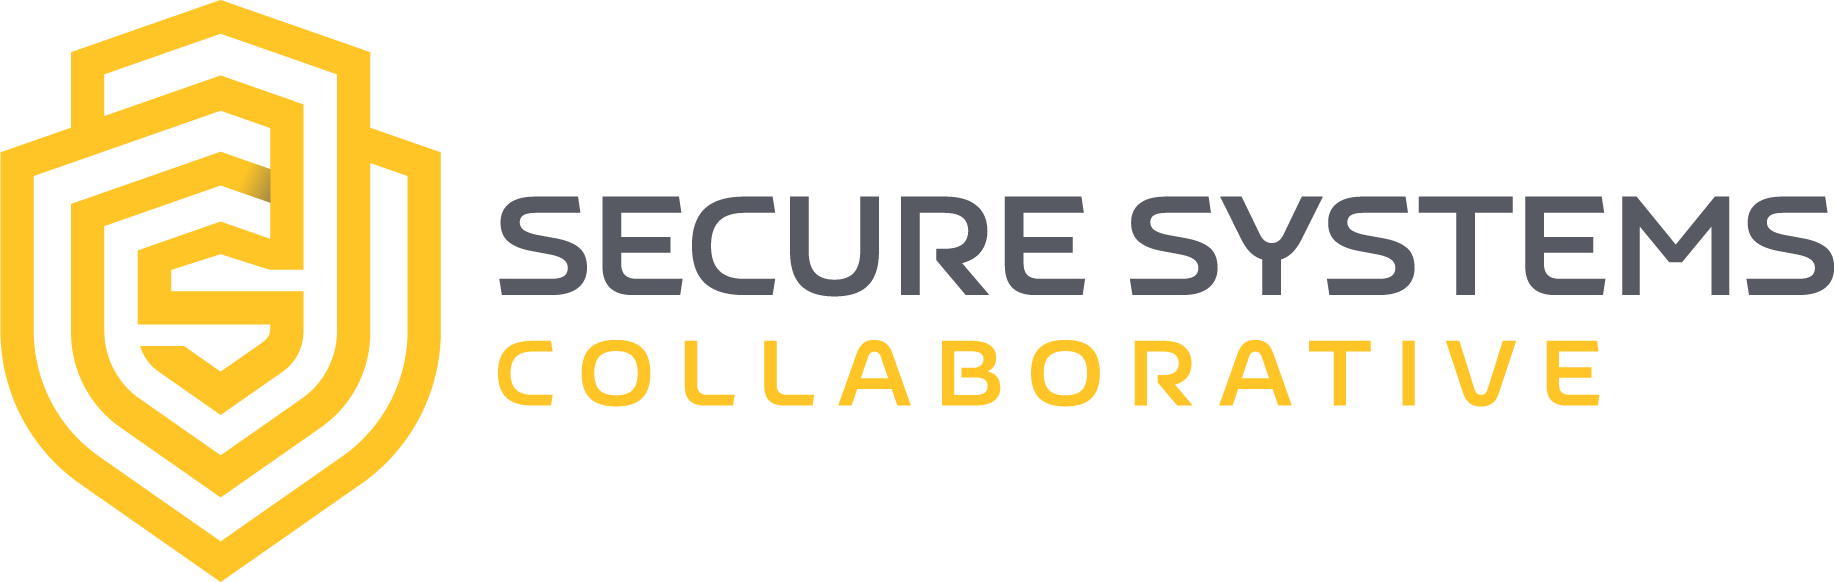 Secure Systems Collaborative